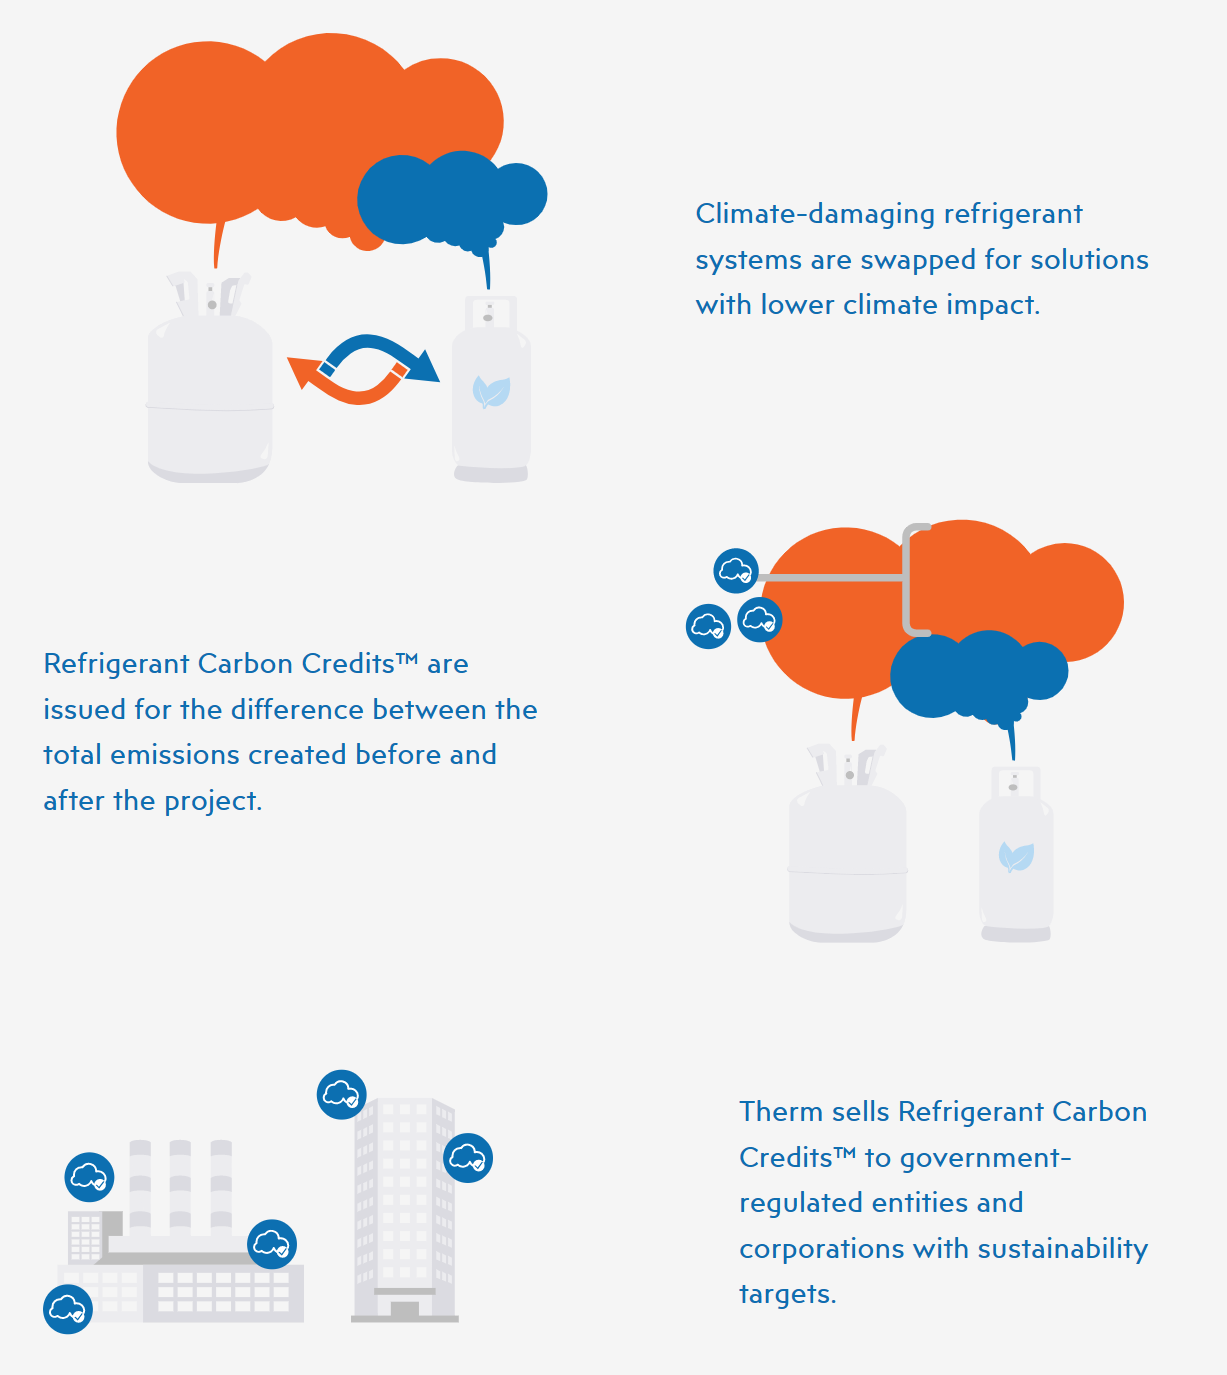 Therm Refrigerant Carbon Credits - how it works